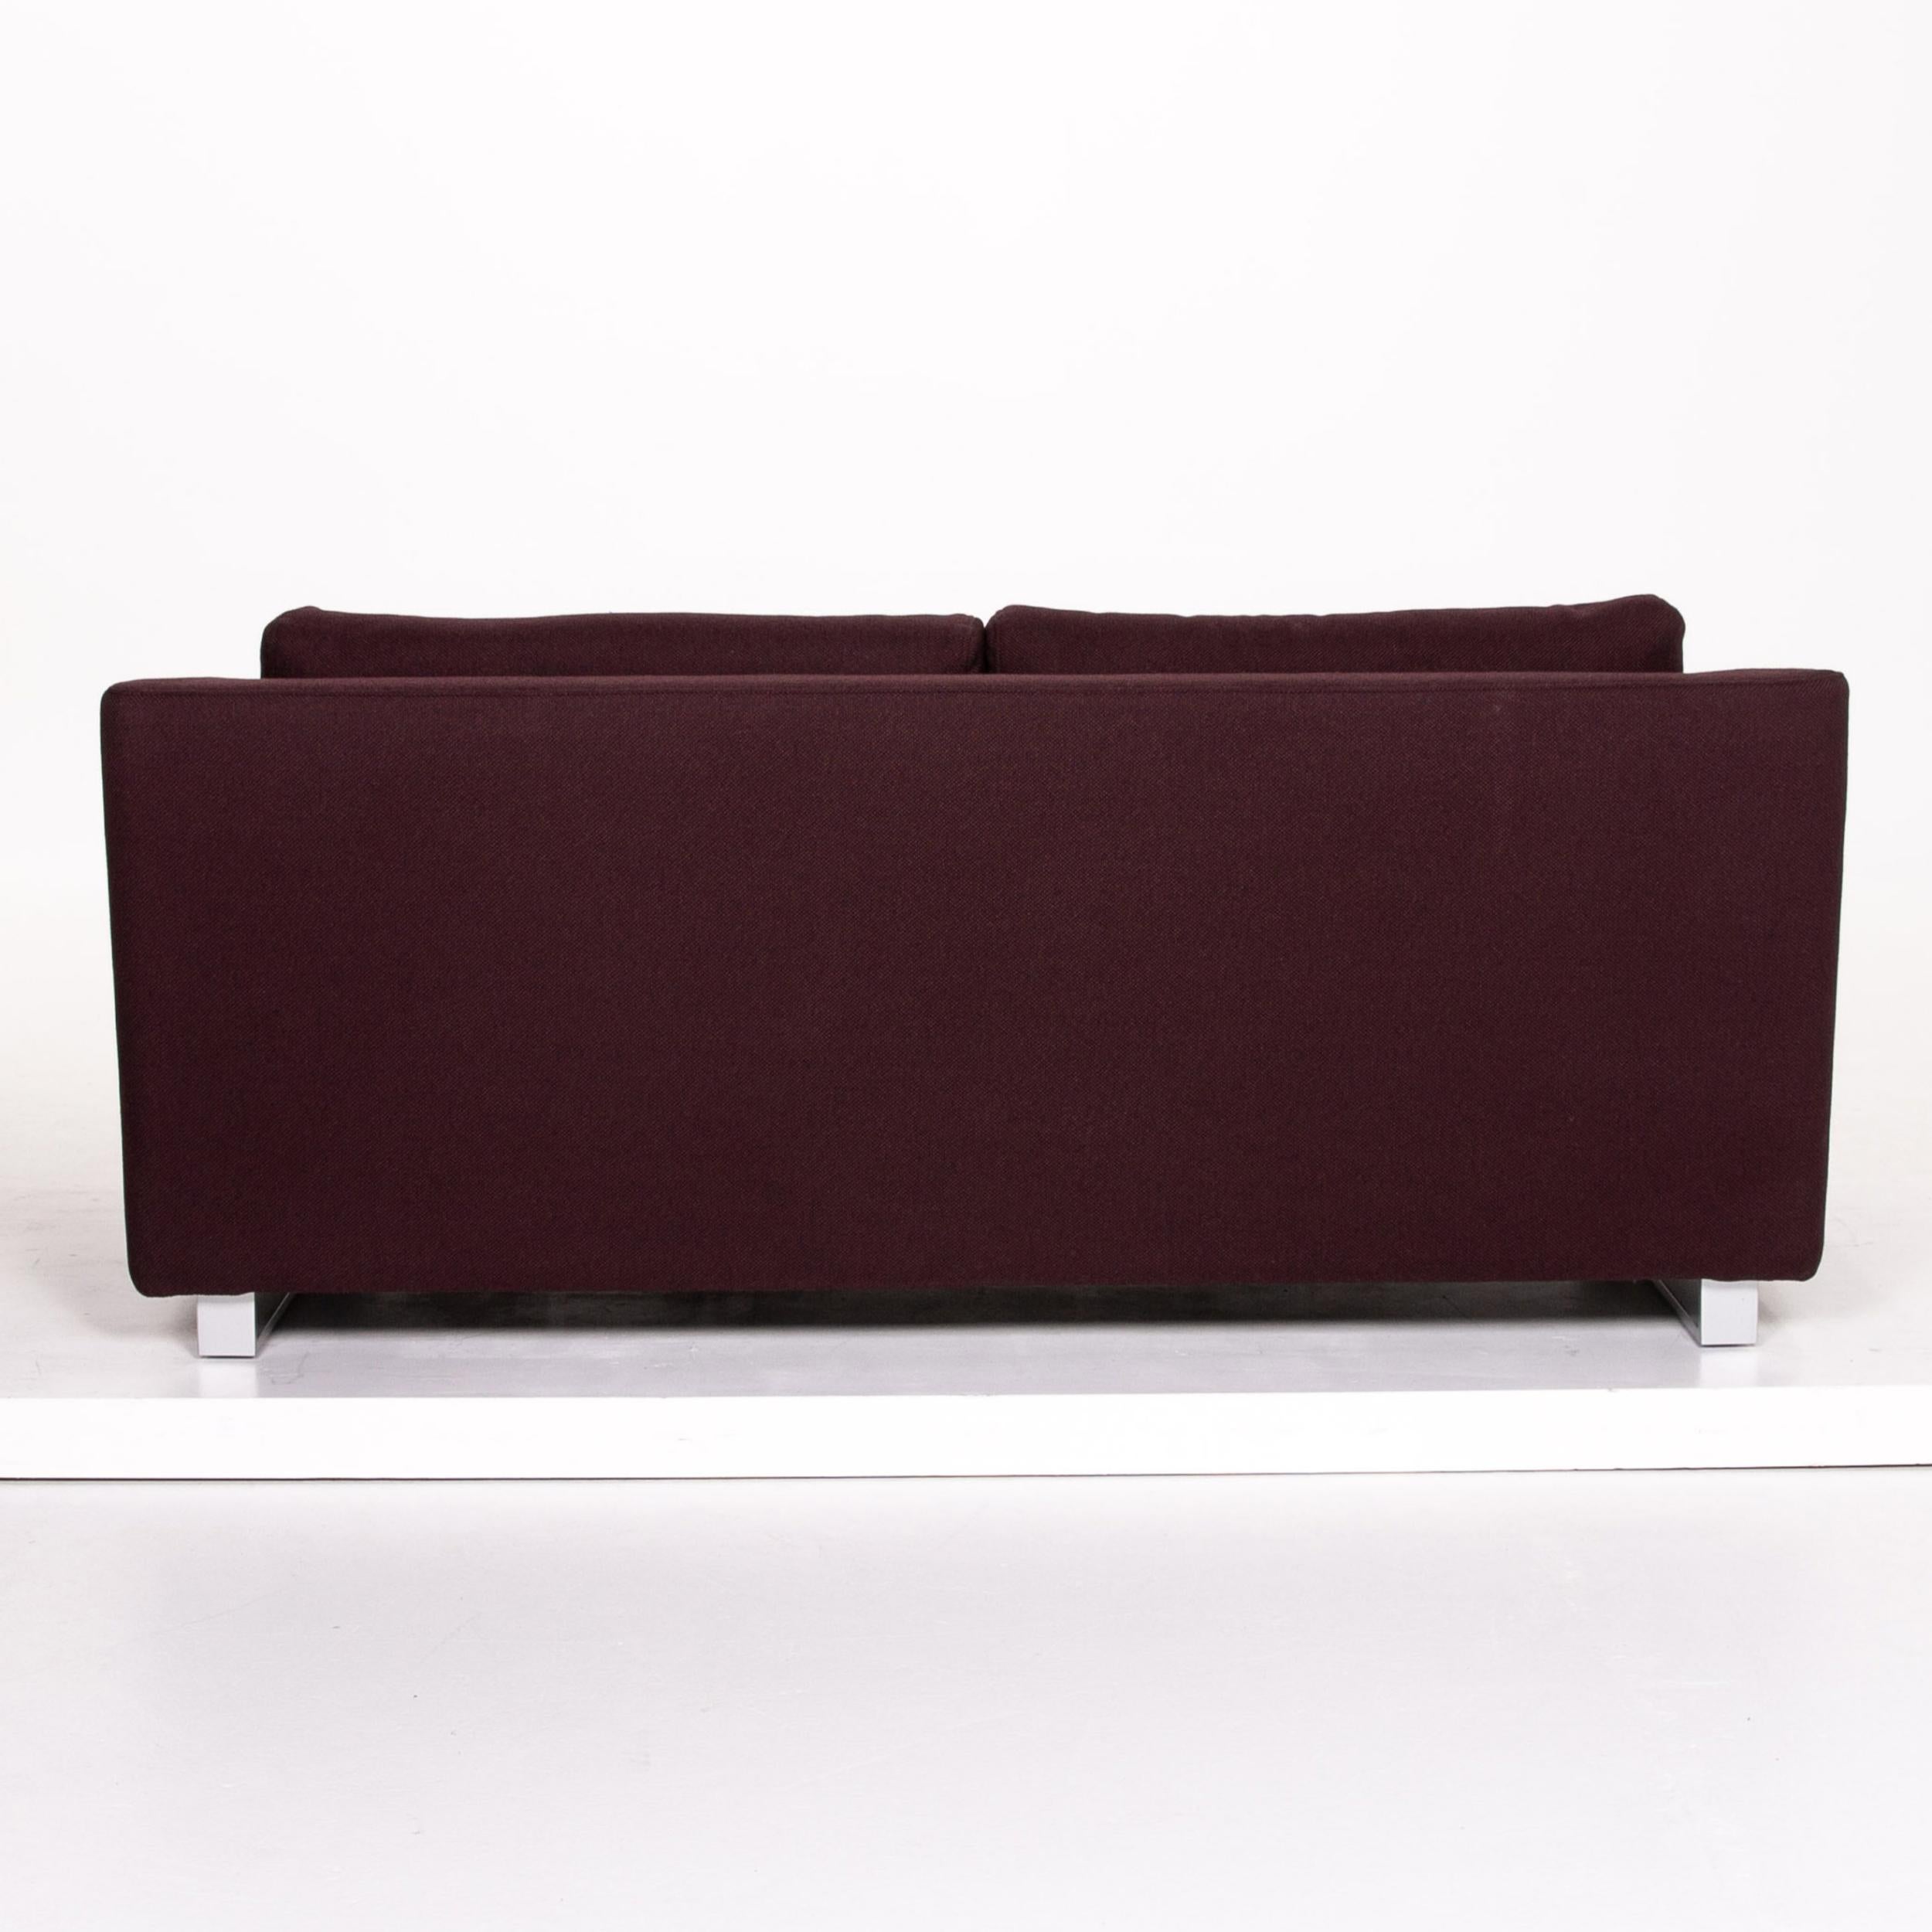 Contemporary Rolf Benz 350 Fabric Sofa Aubergine Violet Three-Seat Couch For Sale